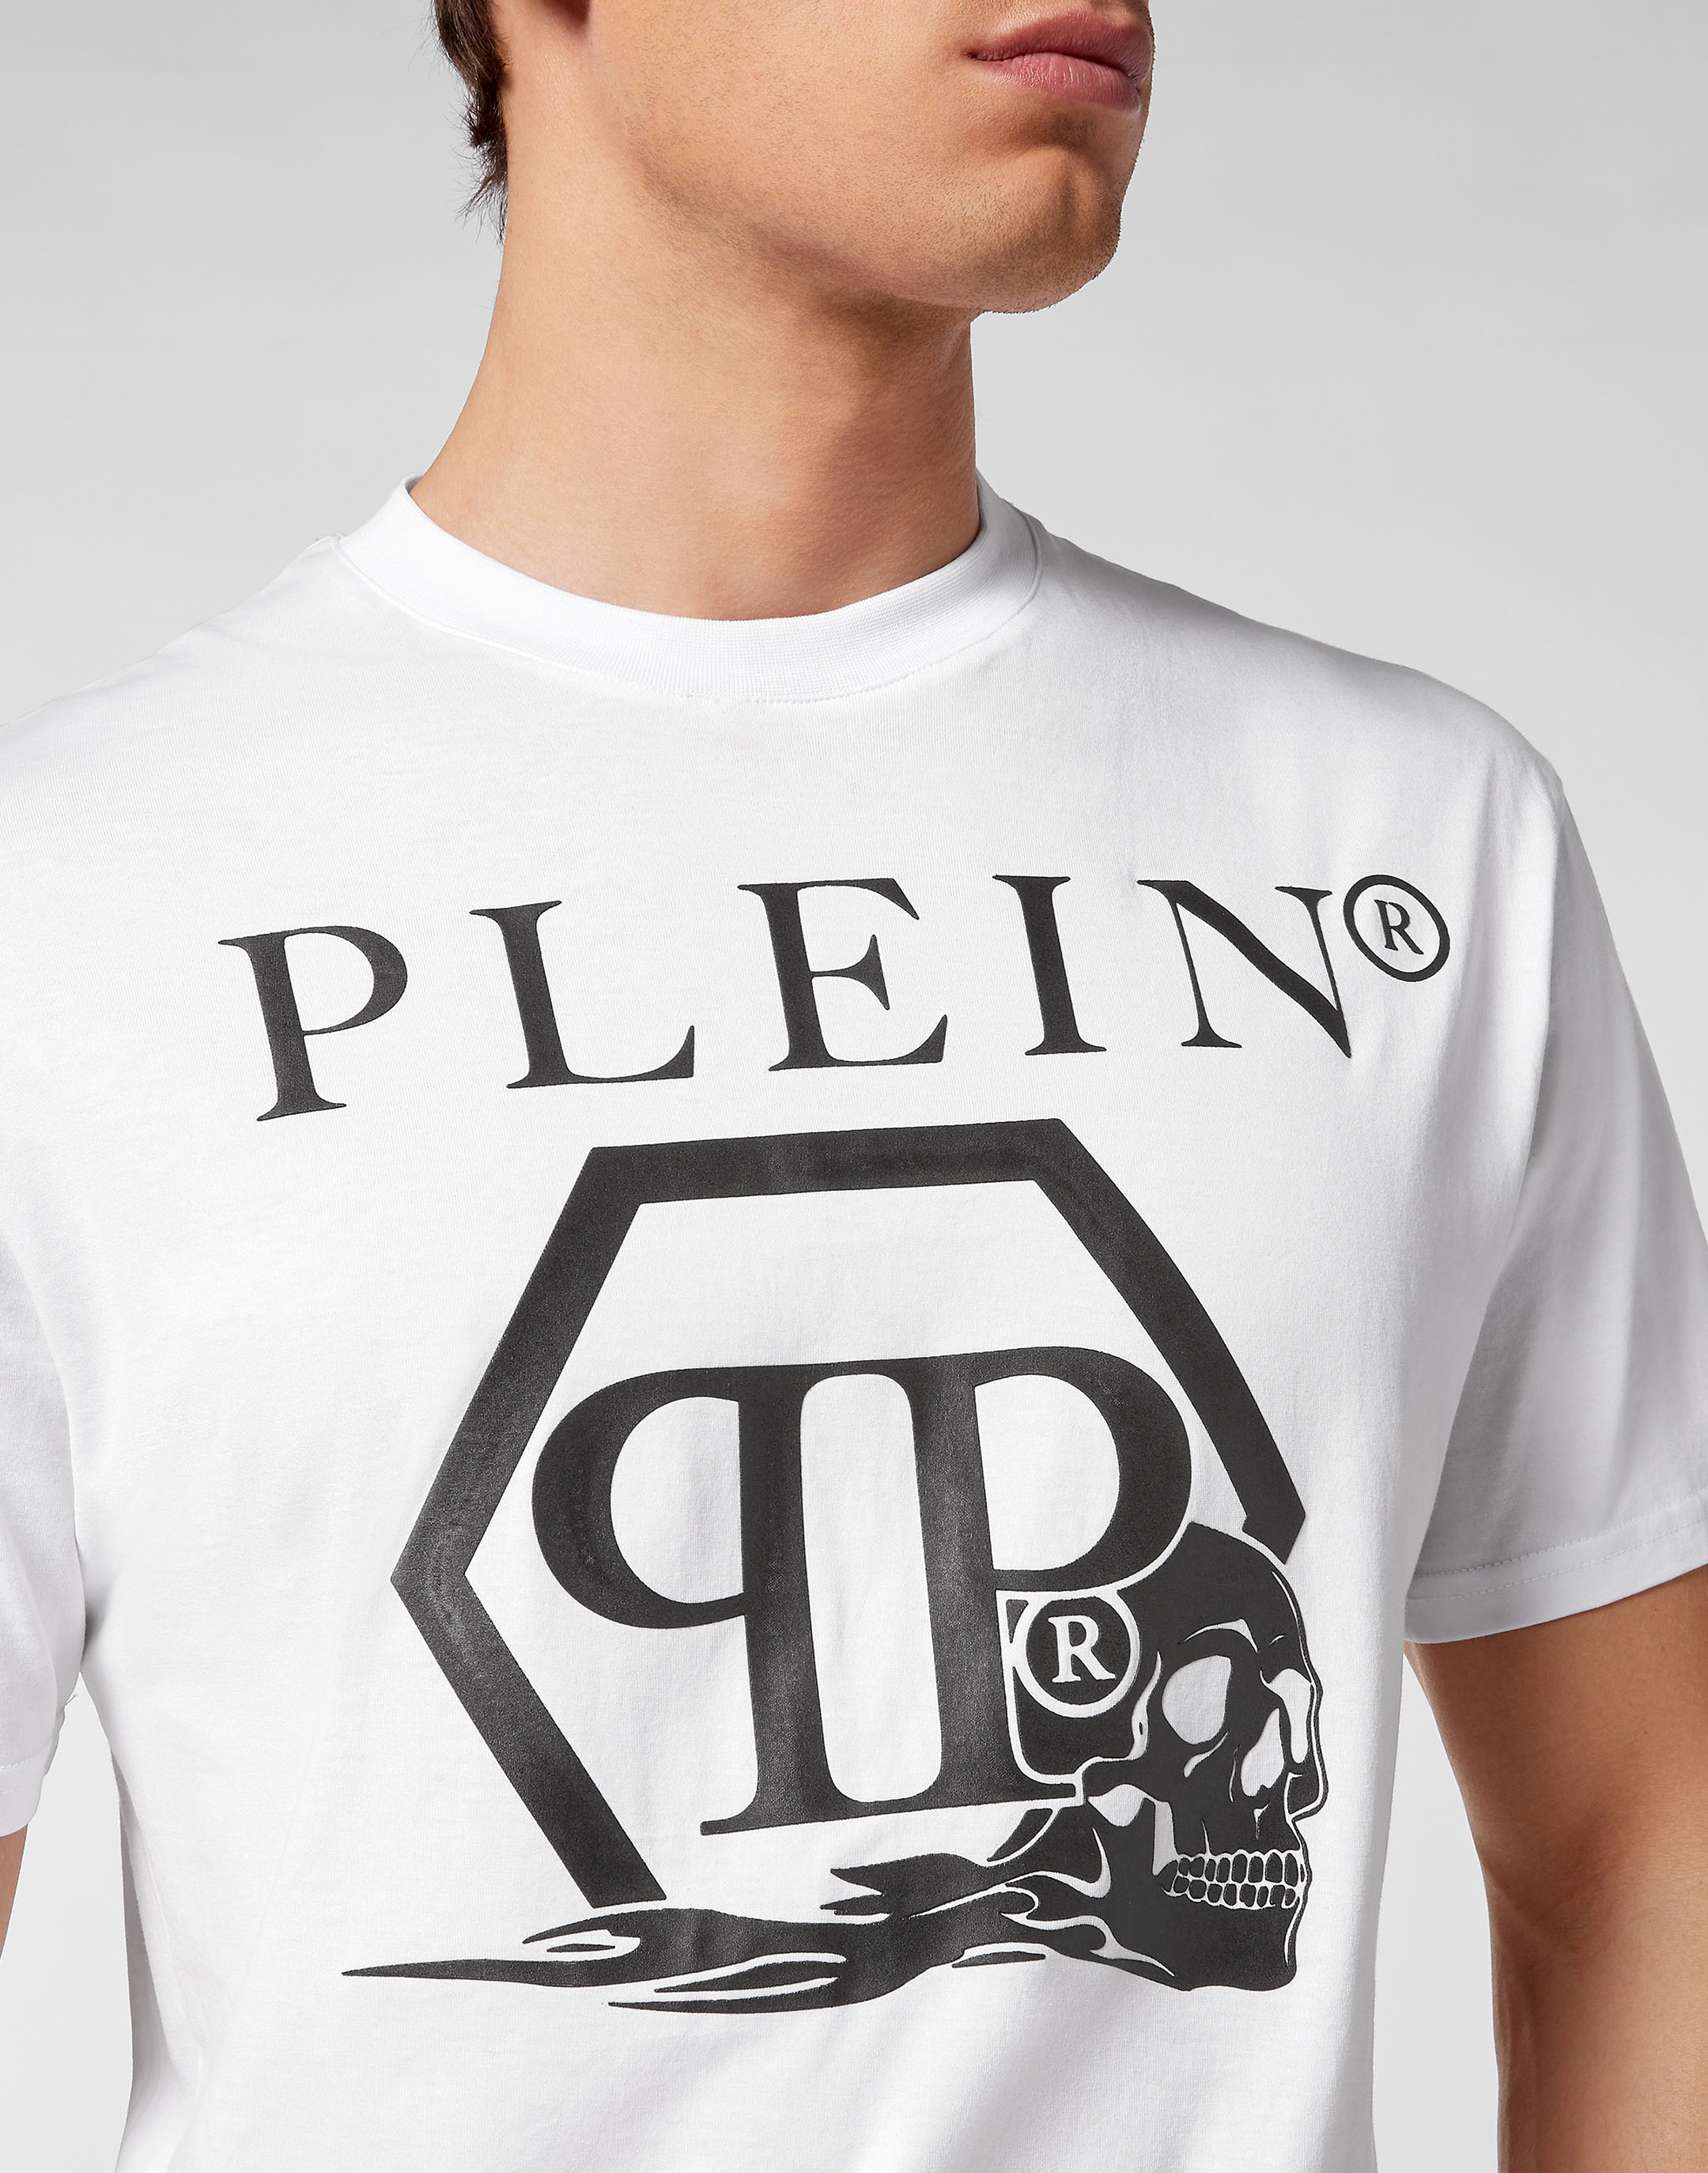 How to spot a fake Philipp Plein Outlet T-shirt – Everything you need to  know about Philipp Plein® Authentic label recognition